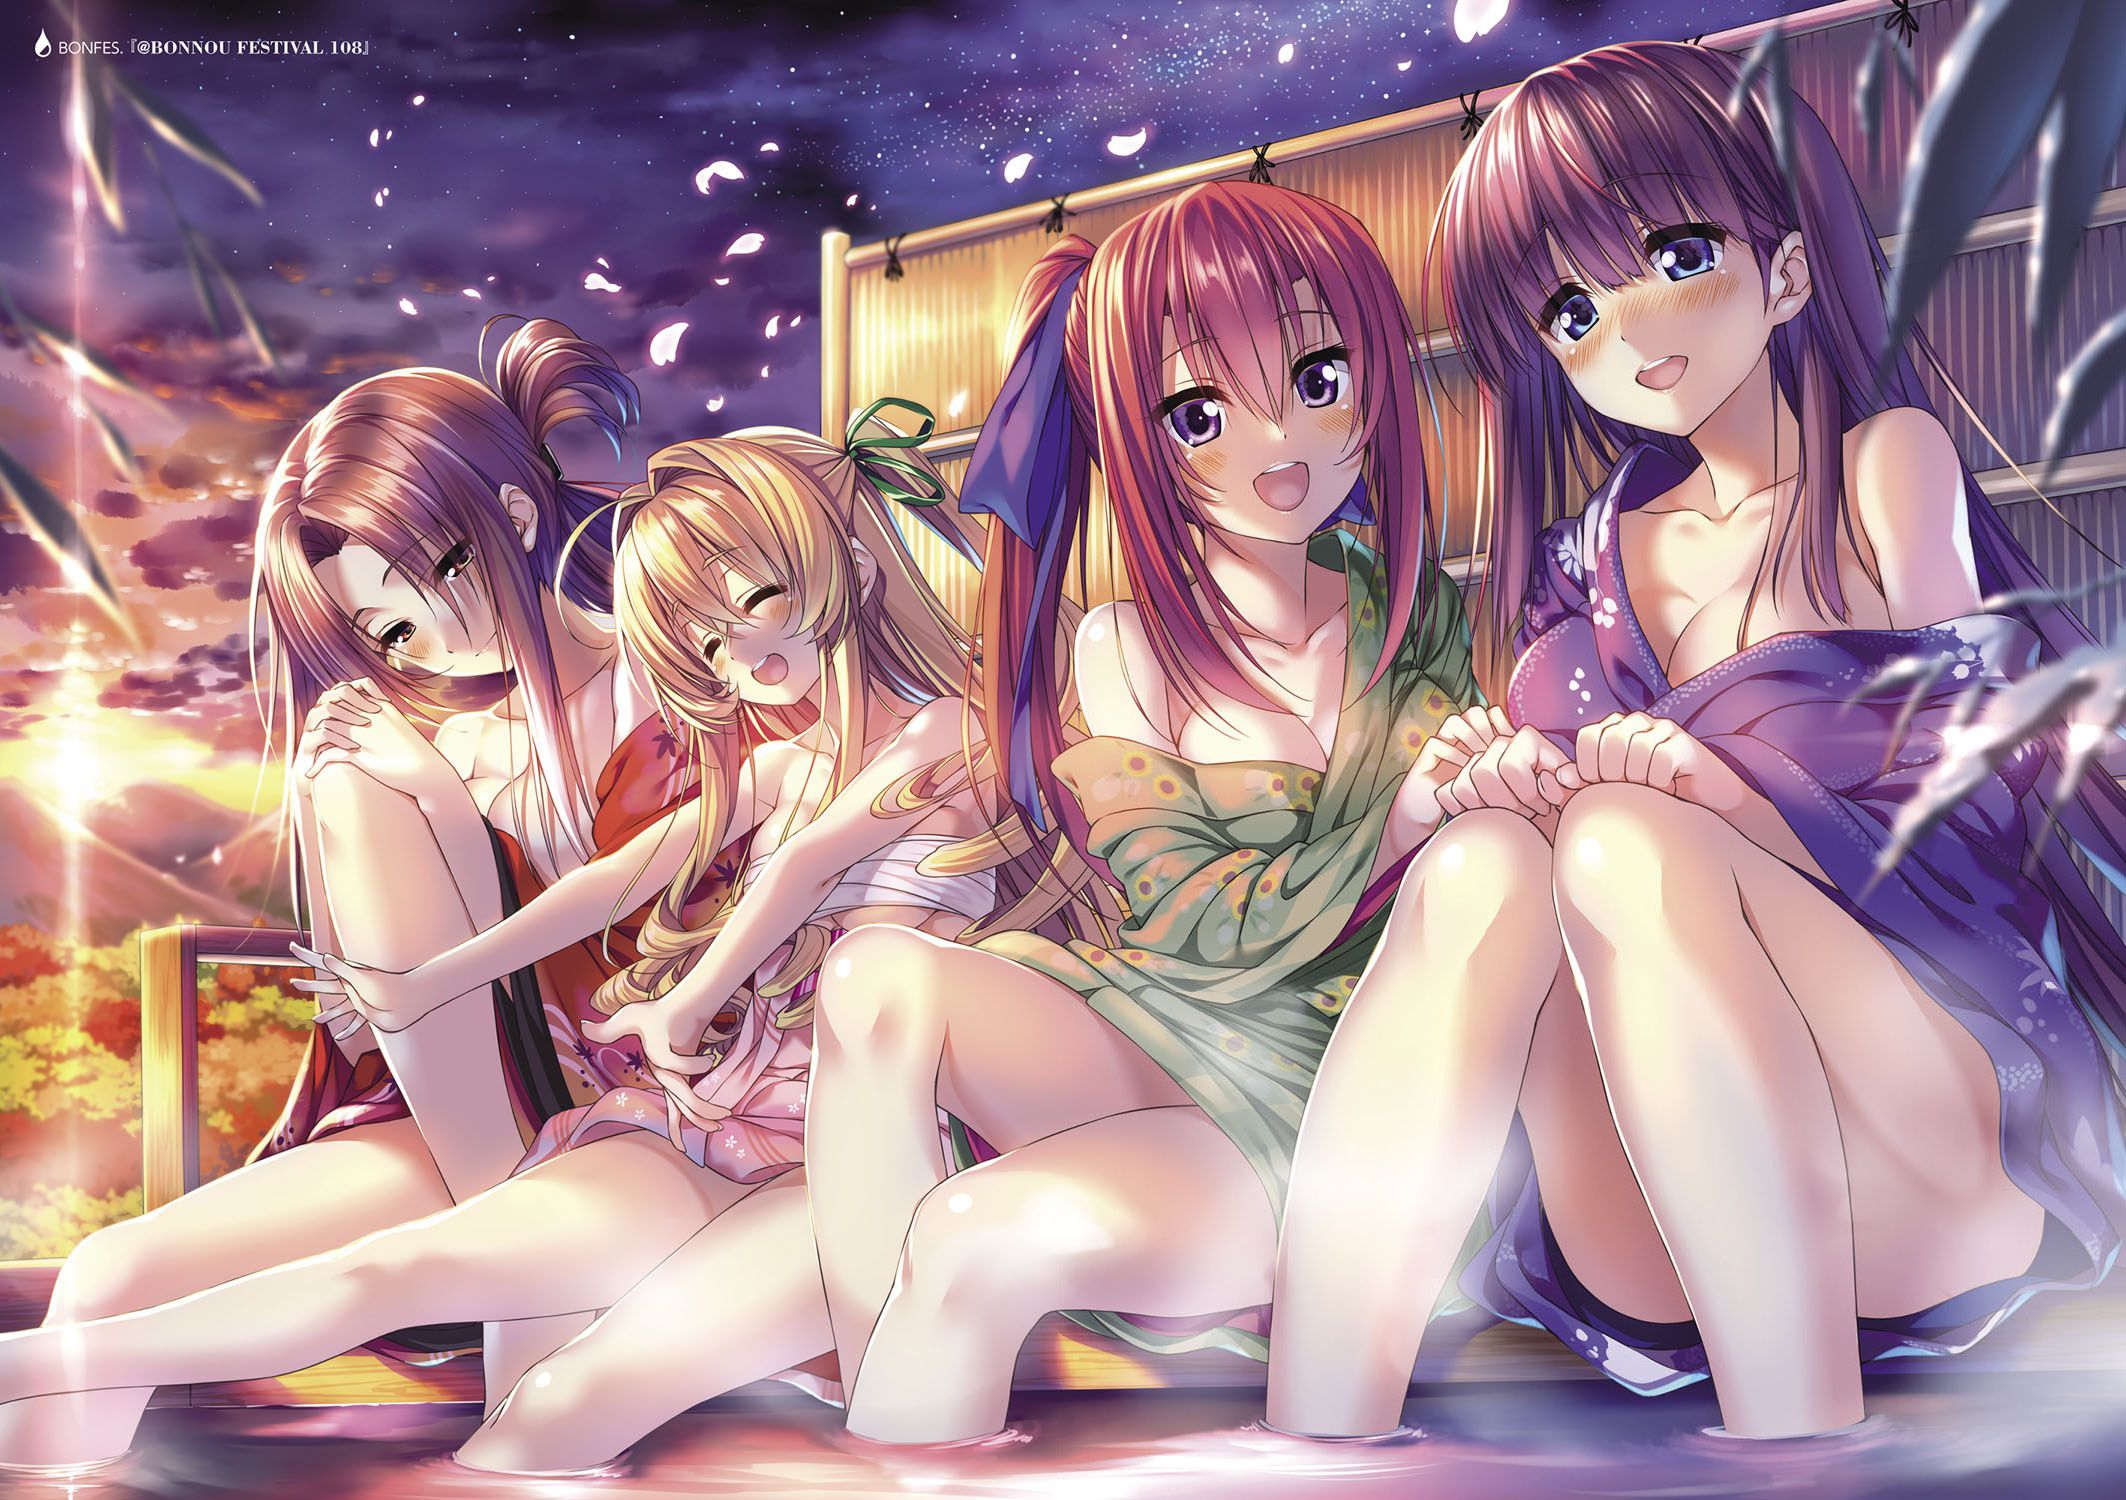 【Erotic Anime Summary】Please enjoy the eros of beautiful girls and beautiful girls shown in the bathroom [50 sheets] 11